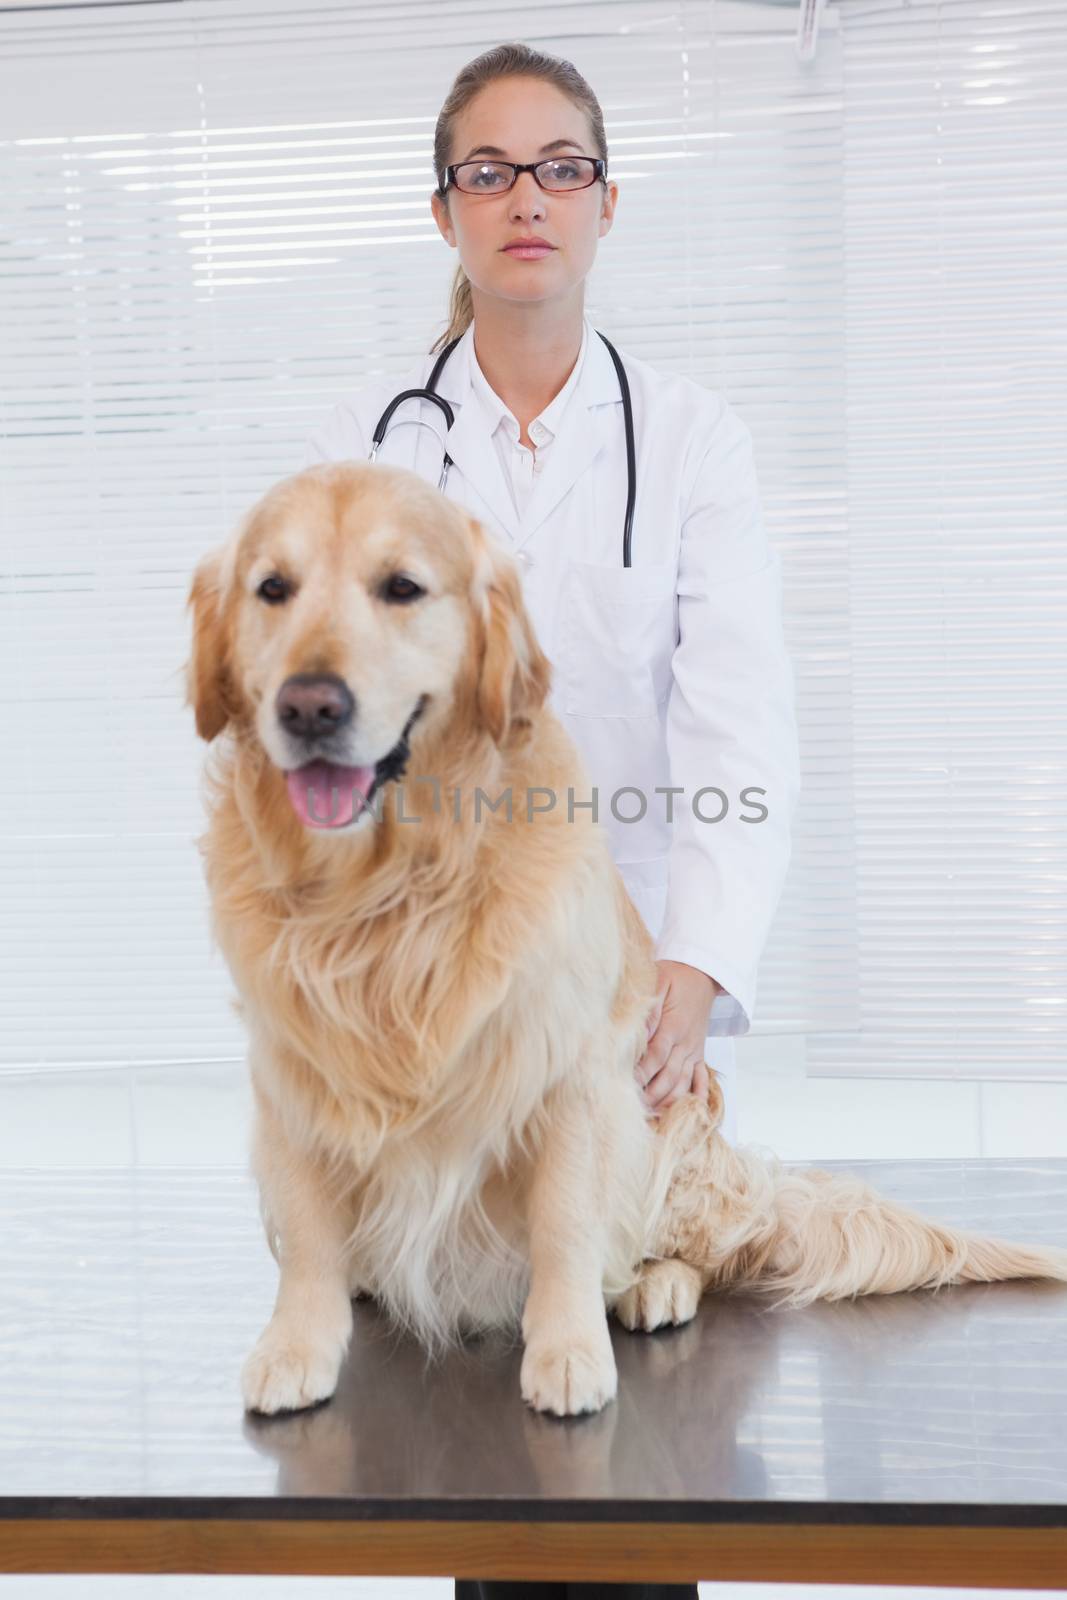 Serious vet about to examine a labrador in her office